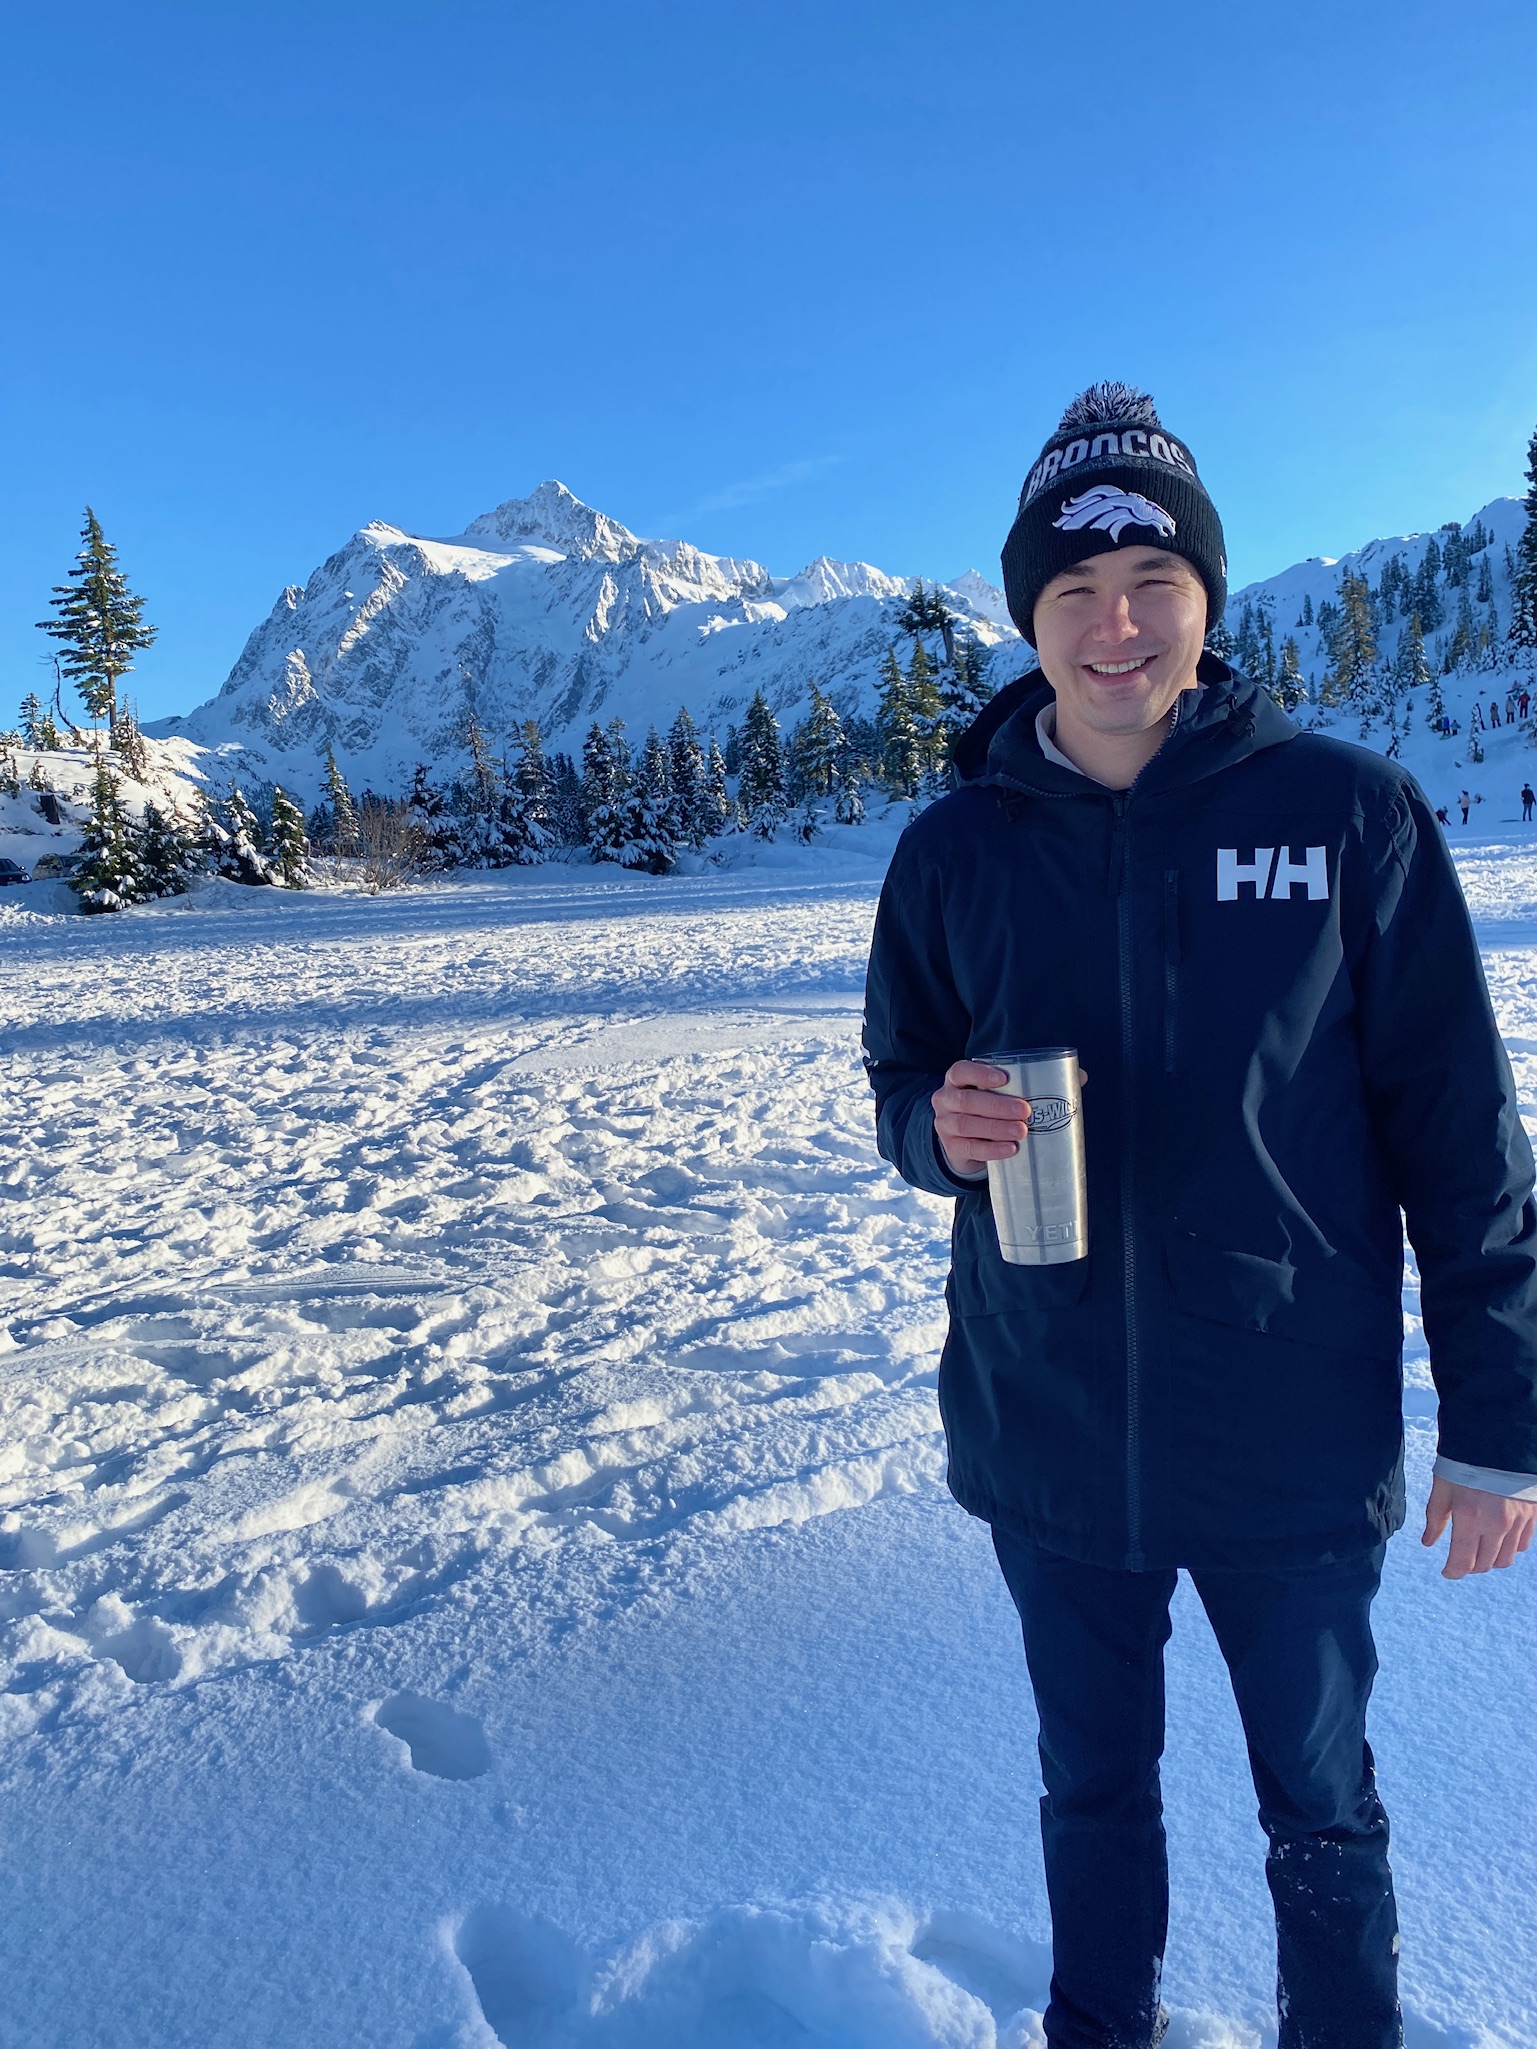 WWU Outstanding Grad Student Taylor Walston holding a travel cup standing in snow with a snowy mountain peak in the backrgound